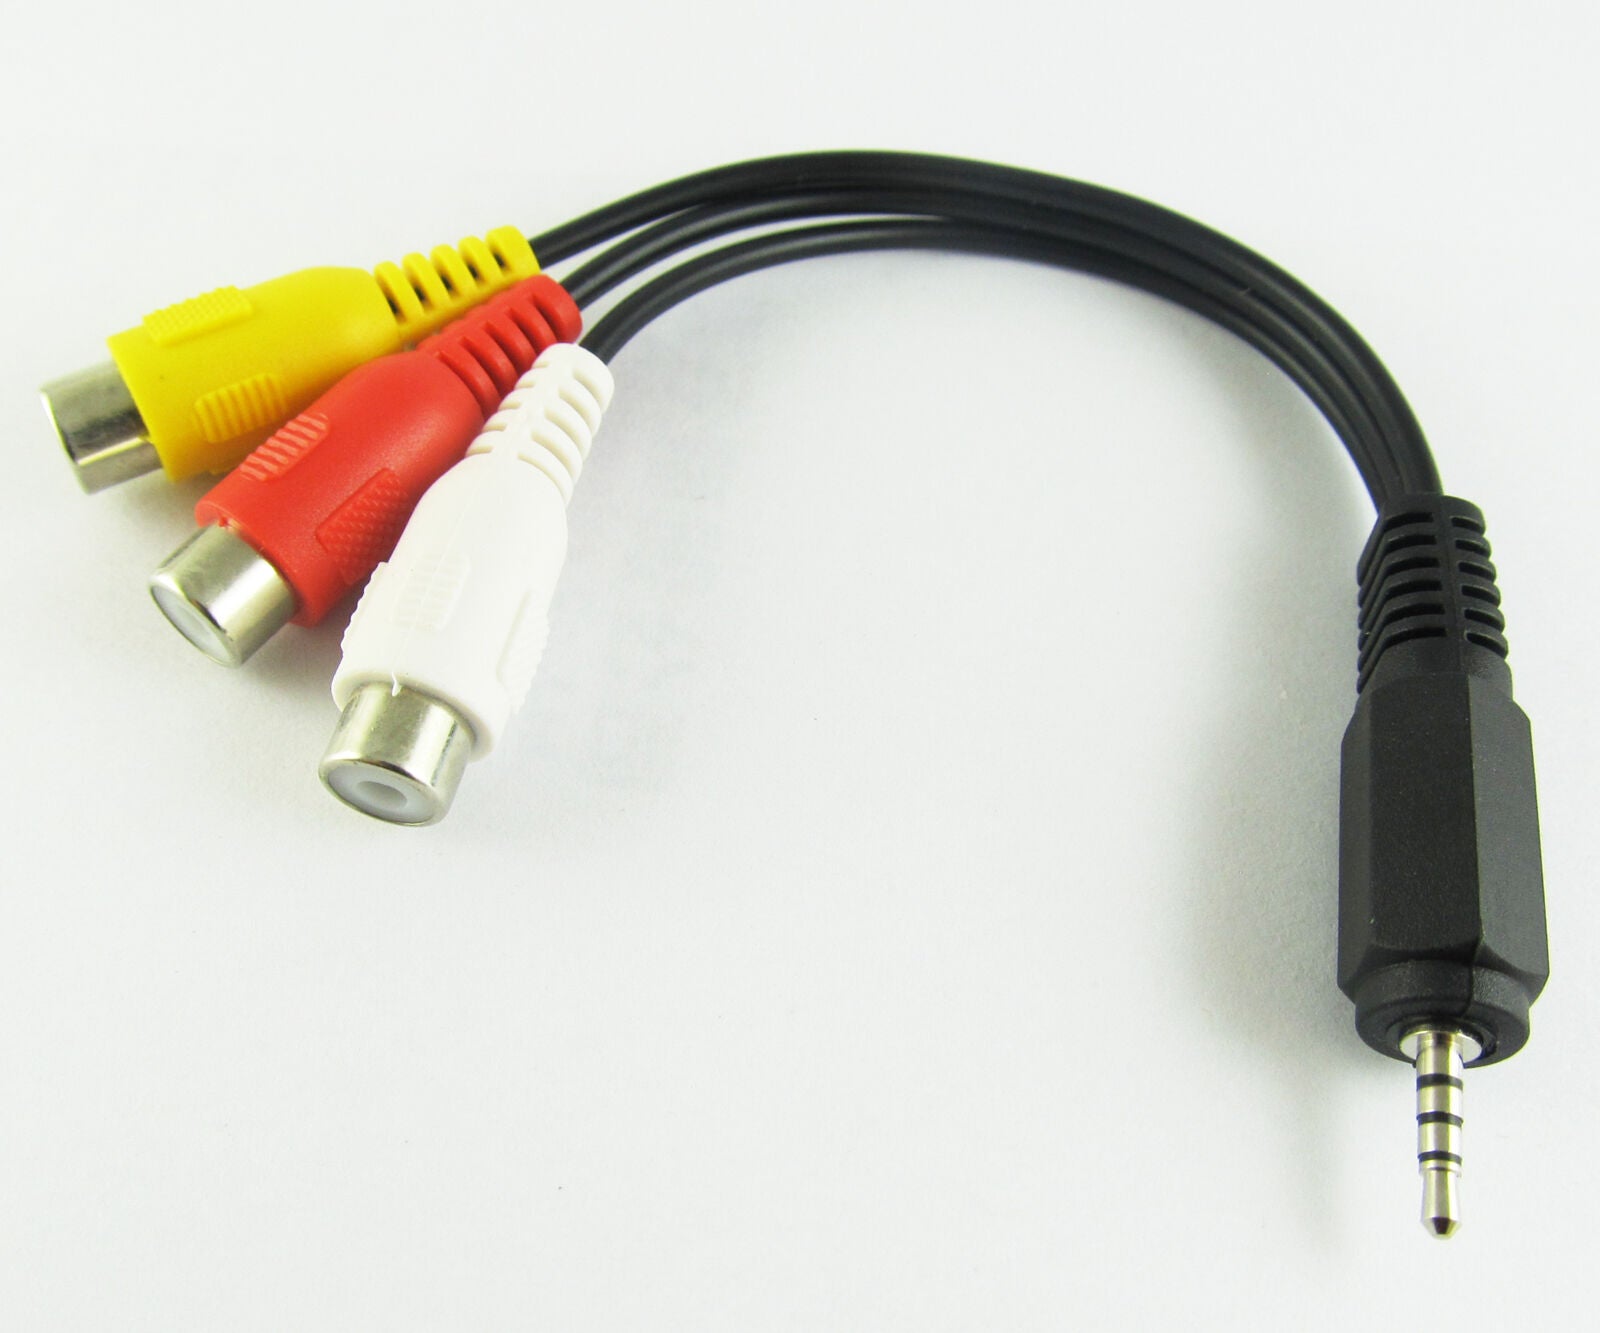 1pc 15cm Audio Video Joint Adapter Cable 2.5mm Male Plug to 3 RCA Jack Female